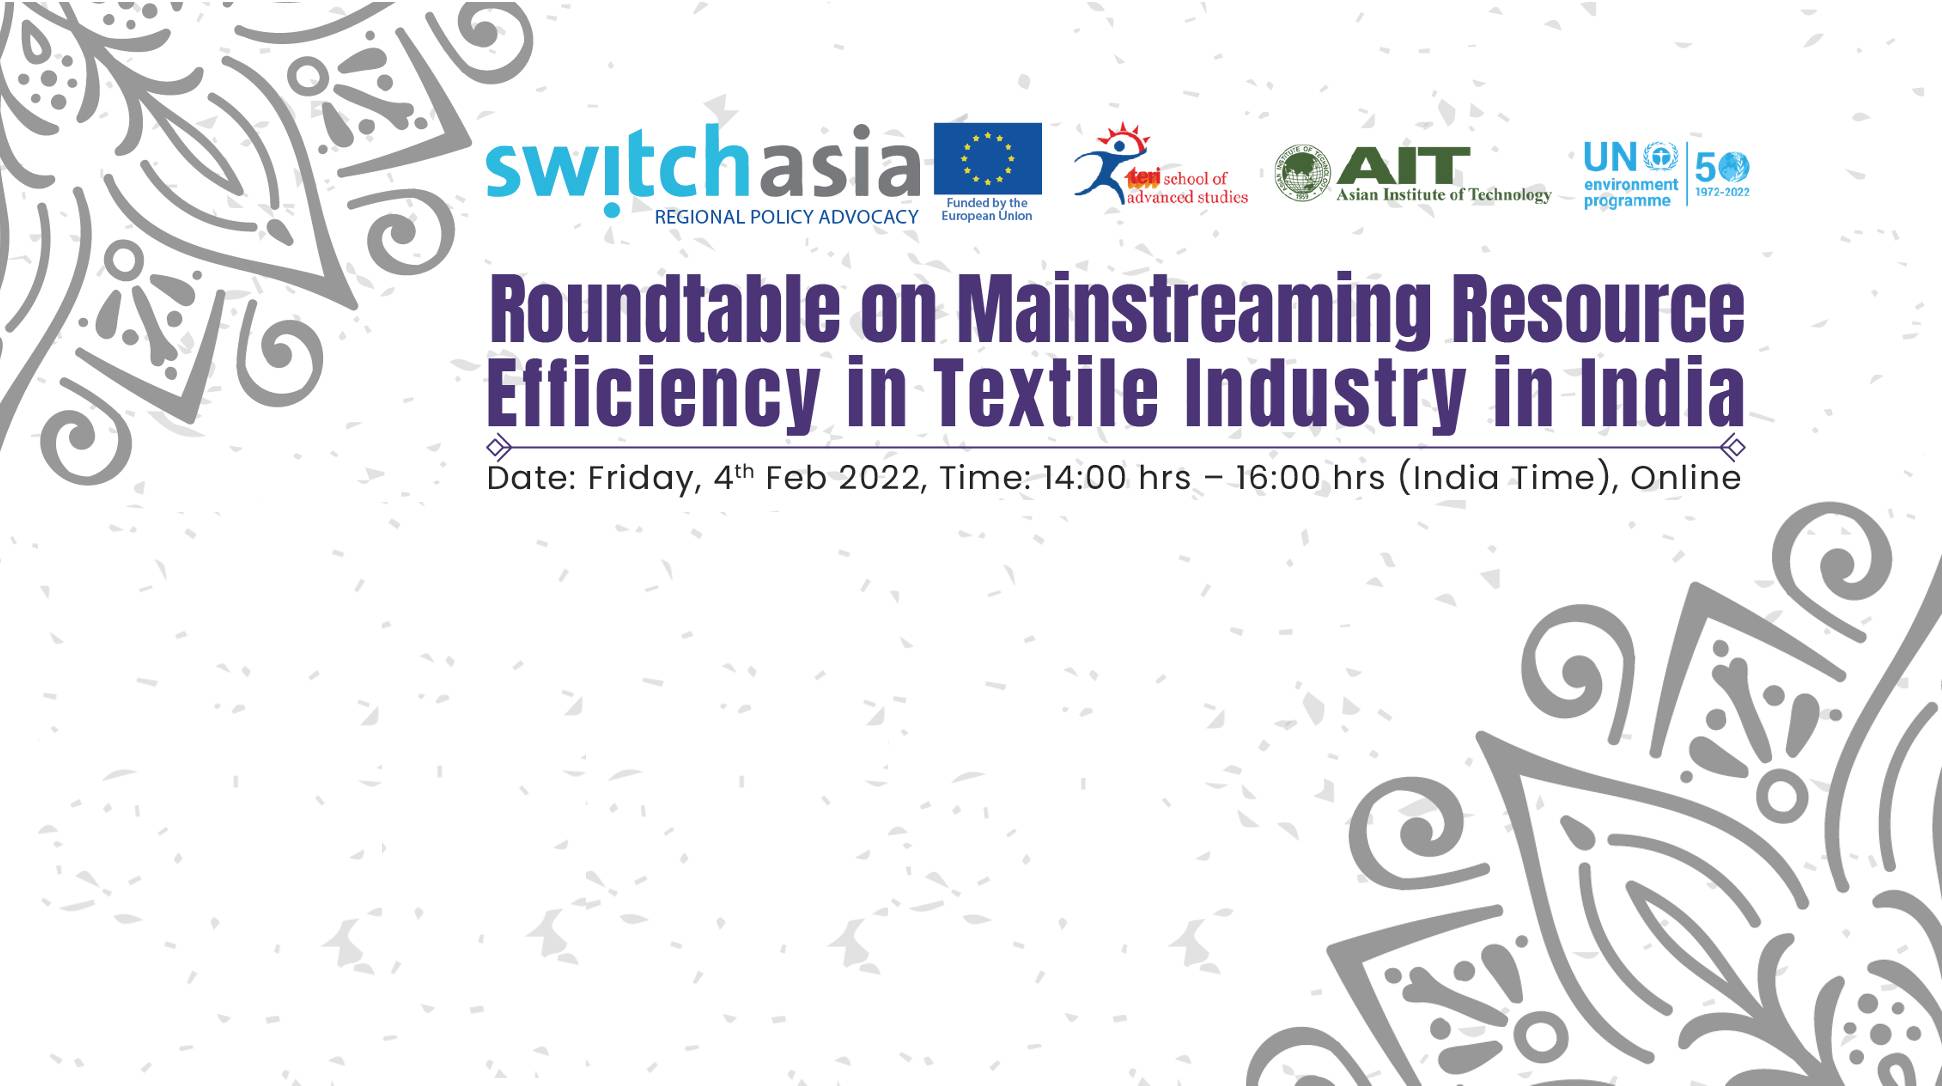 Mainstreaming Resource Efficiency in the Textile Sector in India